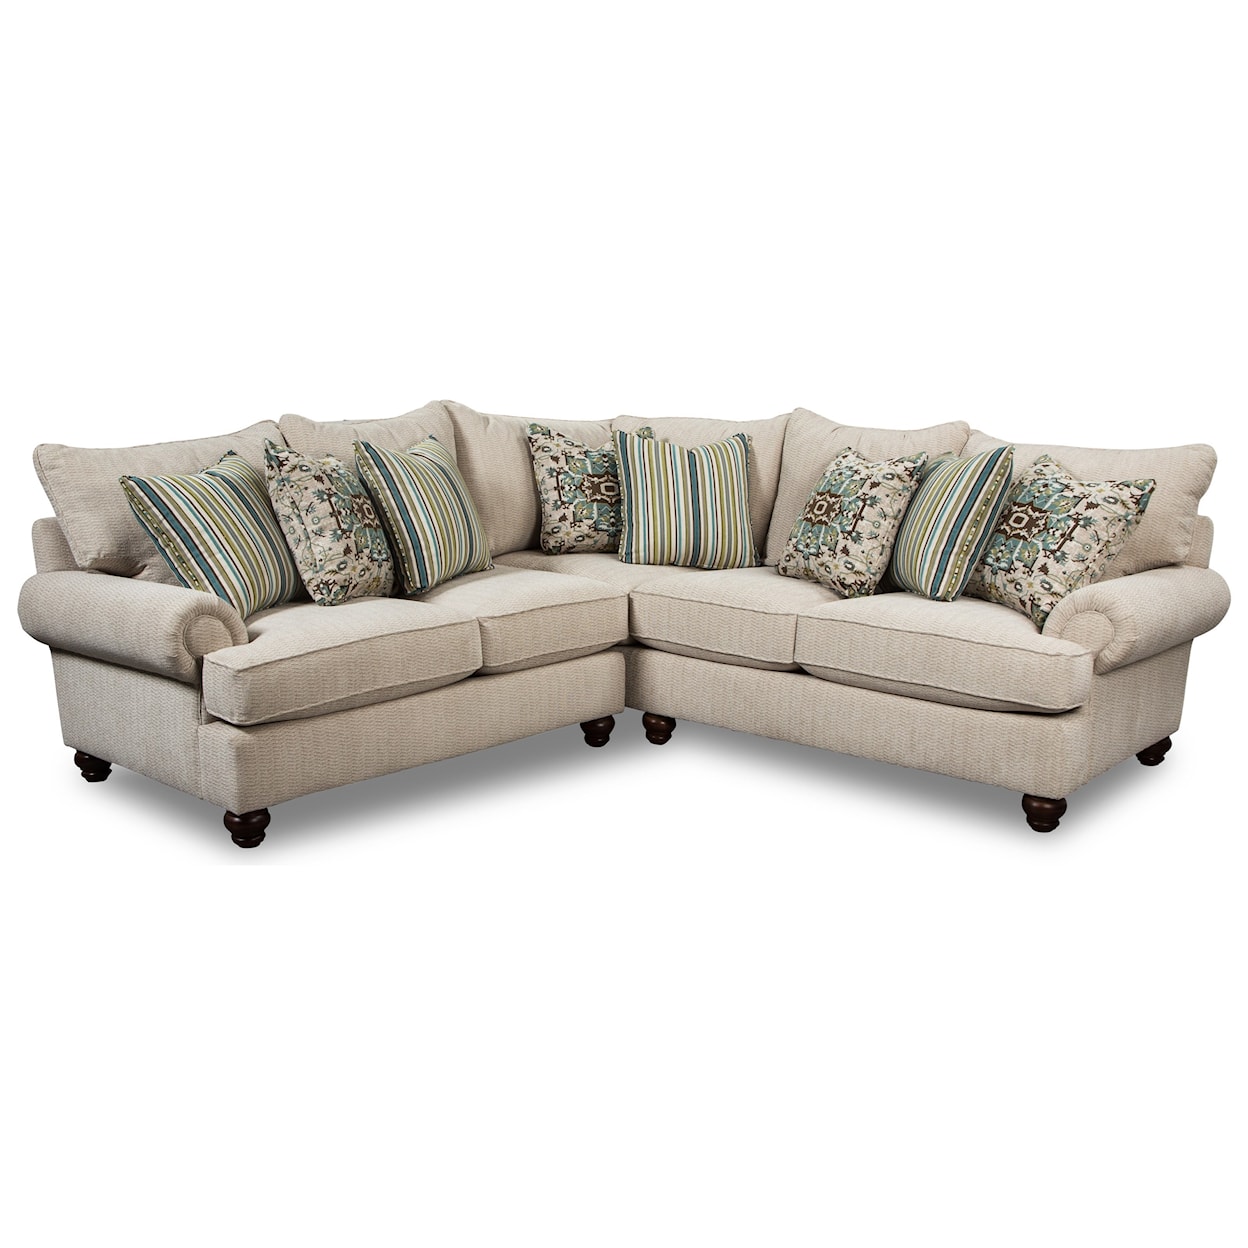 Craftmaster 797050BD 4-Seat Sectional Sofa